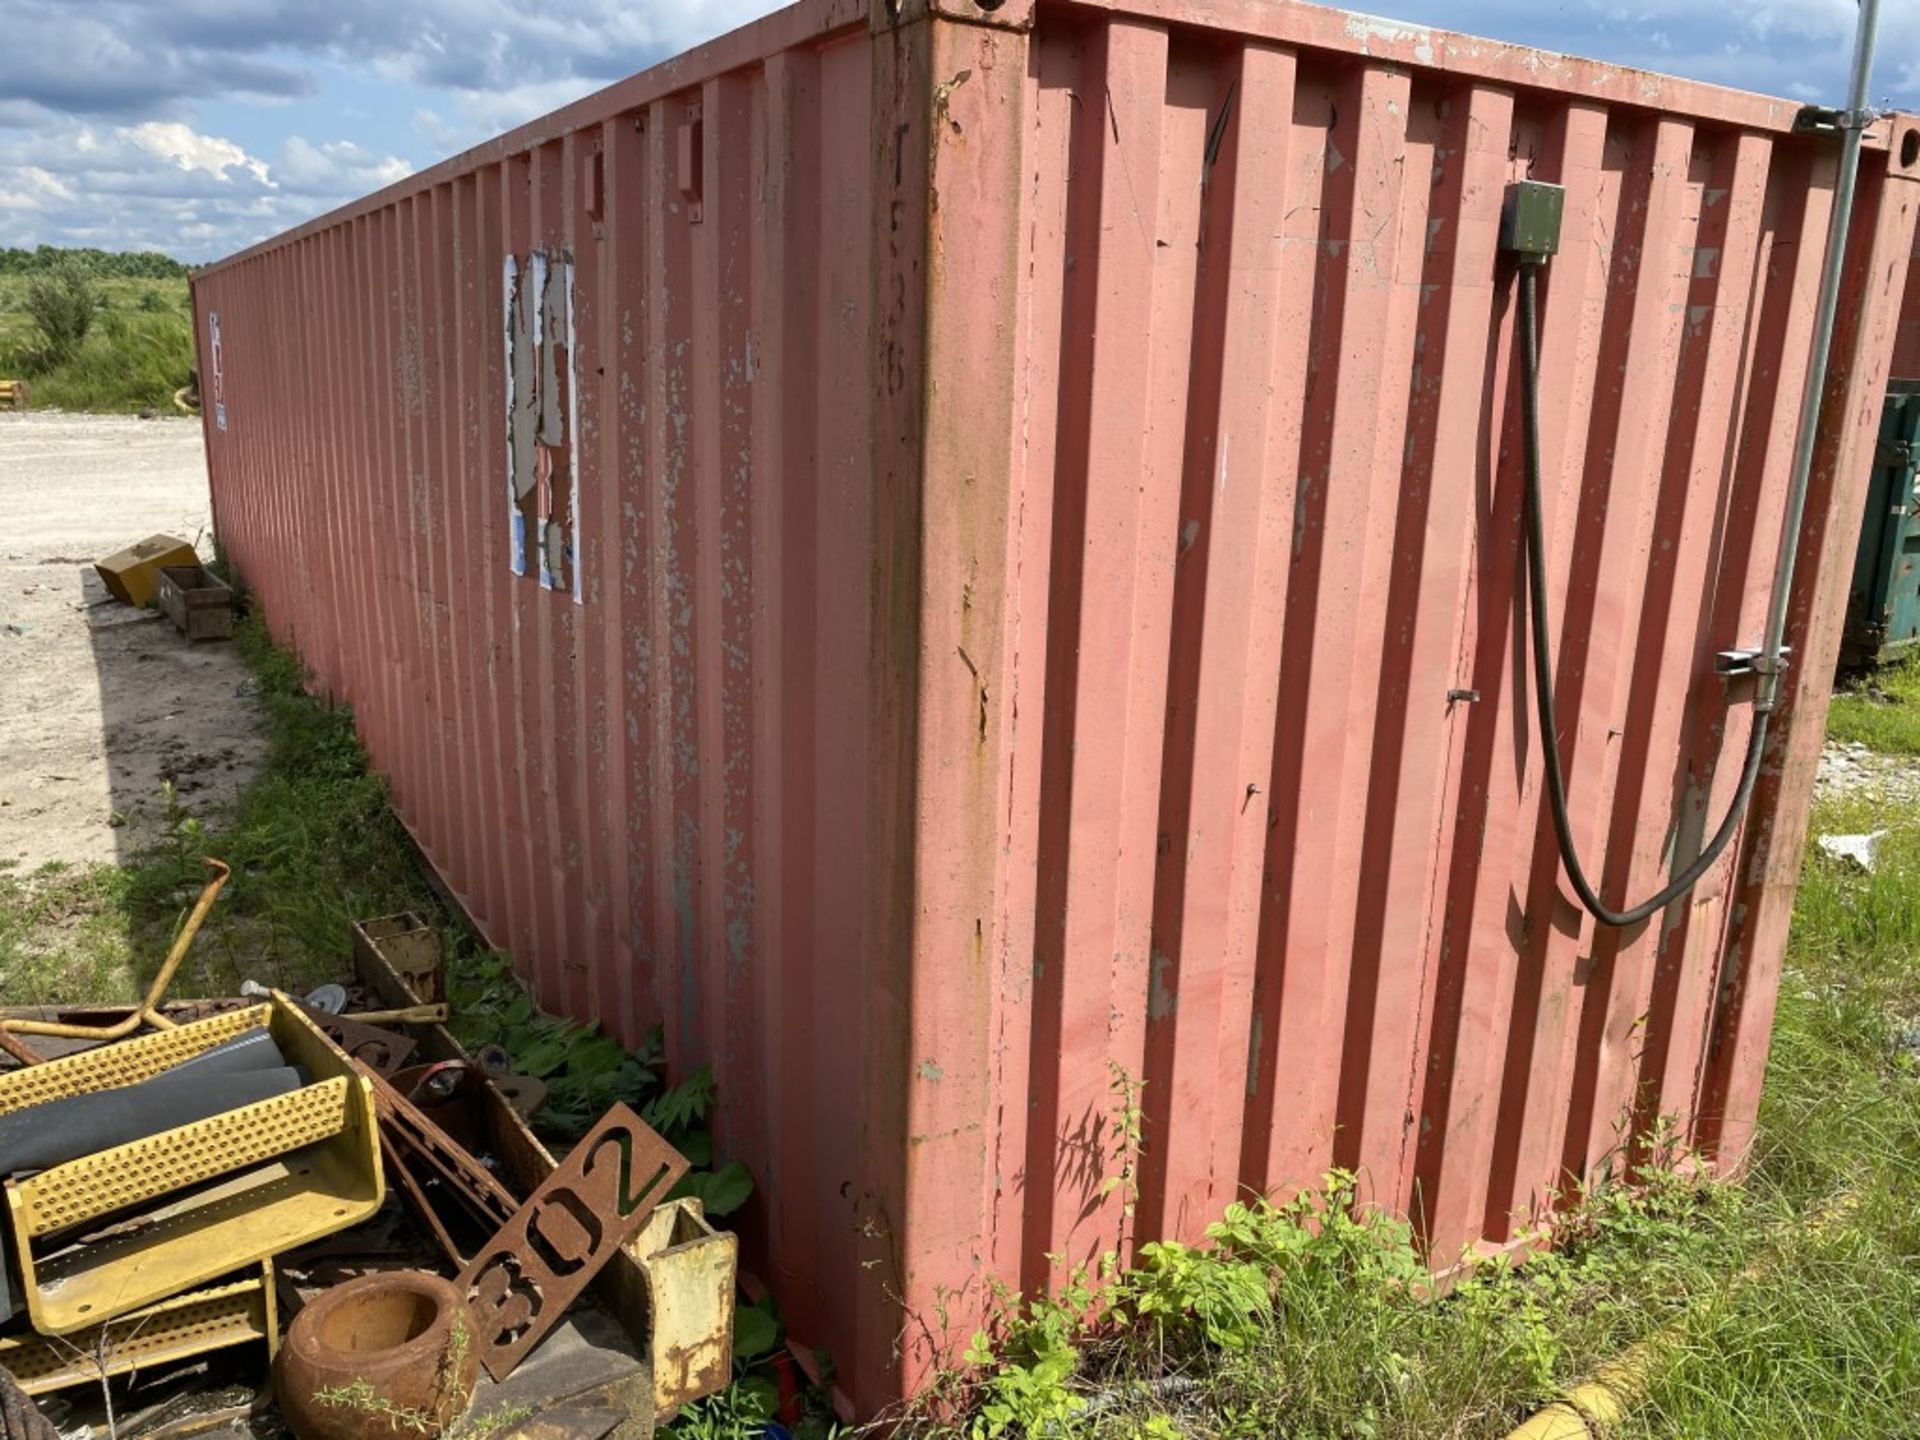 40' STEEL STORAGE CONTAINER FULL OF NEW FILTERS, HARDWARE, AND PARTS, HAS SHELVING & LIGHT - Image 24 of 24